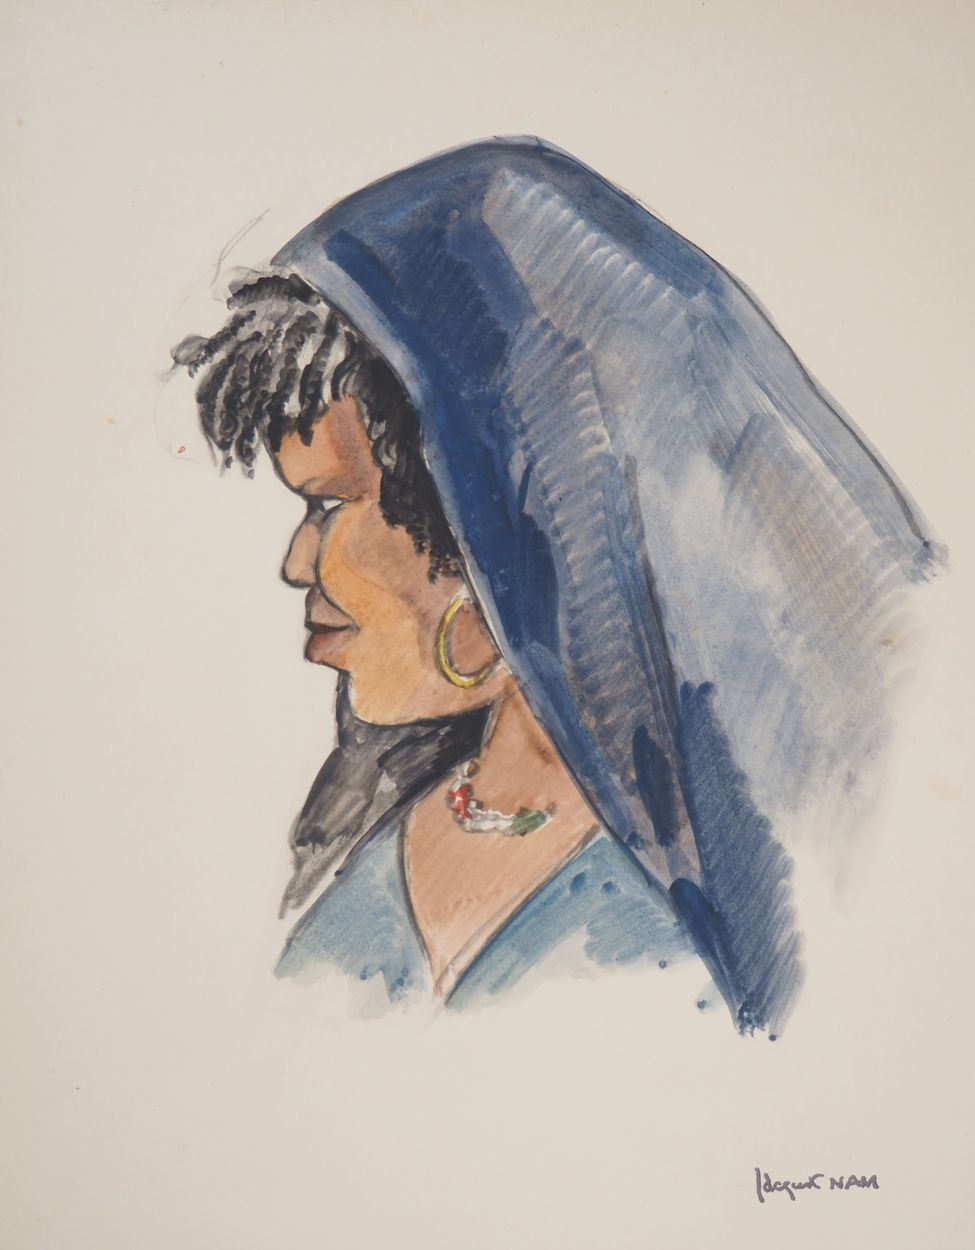 Jacques NAM Jacques Nam (Jacques Lehmann, known as)

Woman with blue shawl, c. 1&hellip;